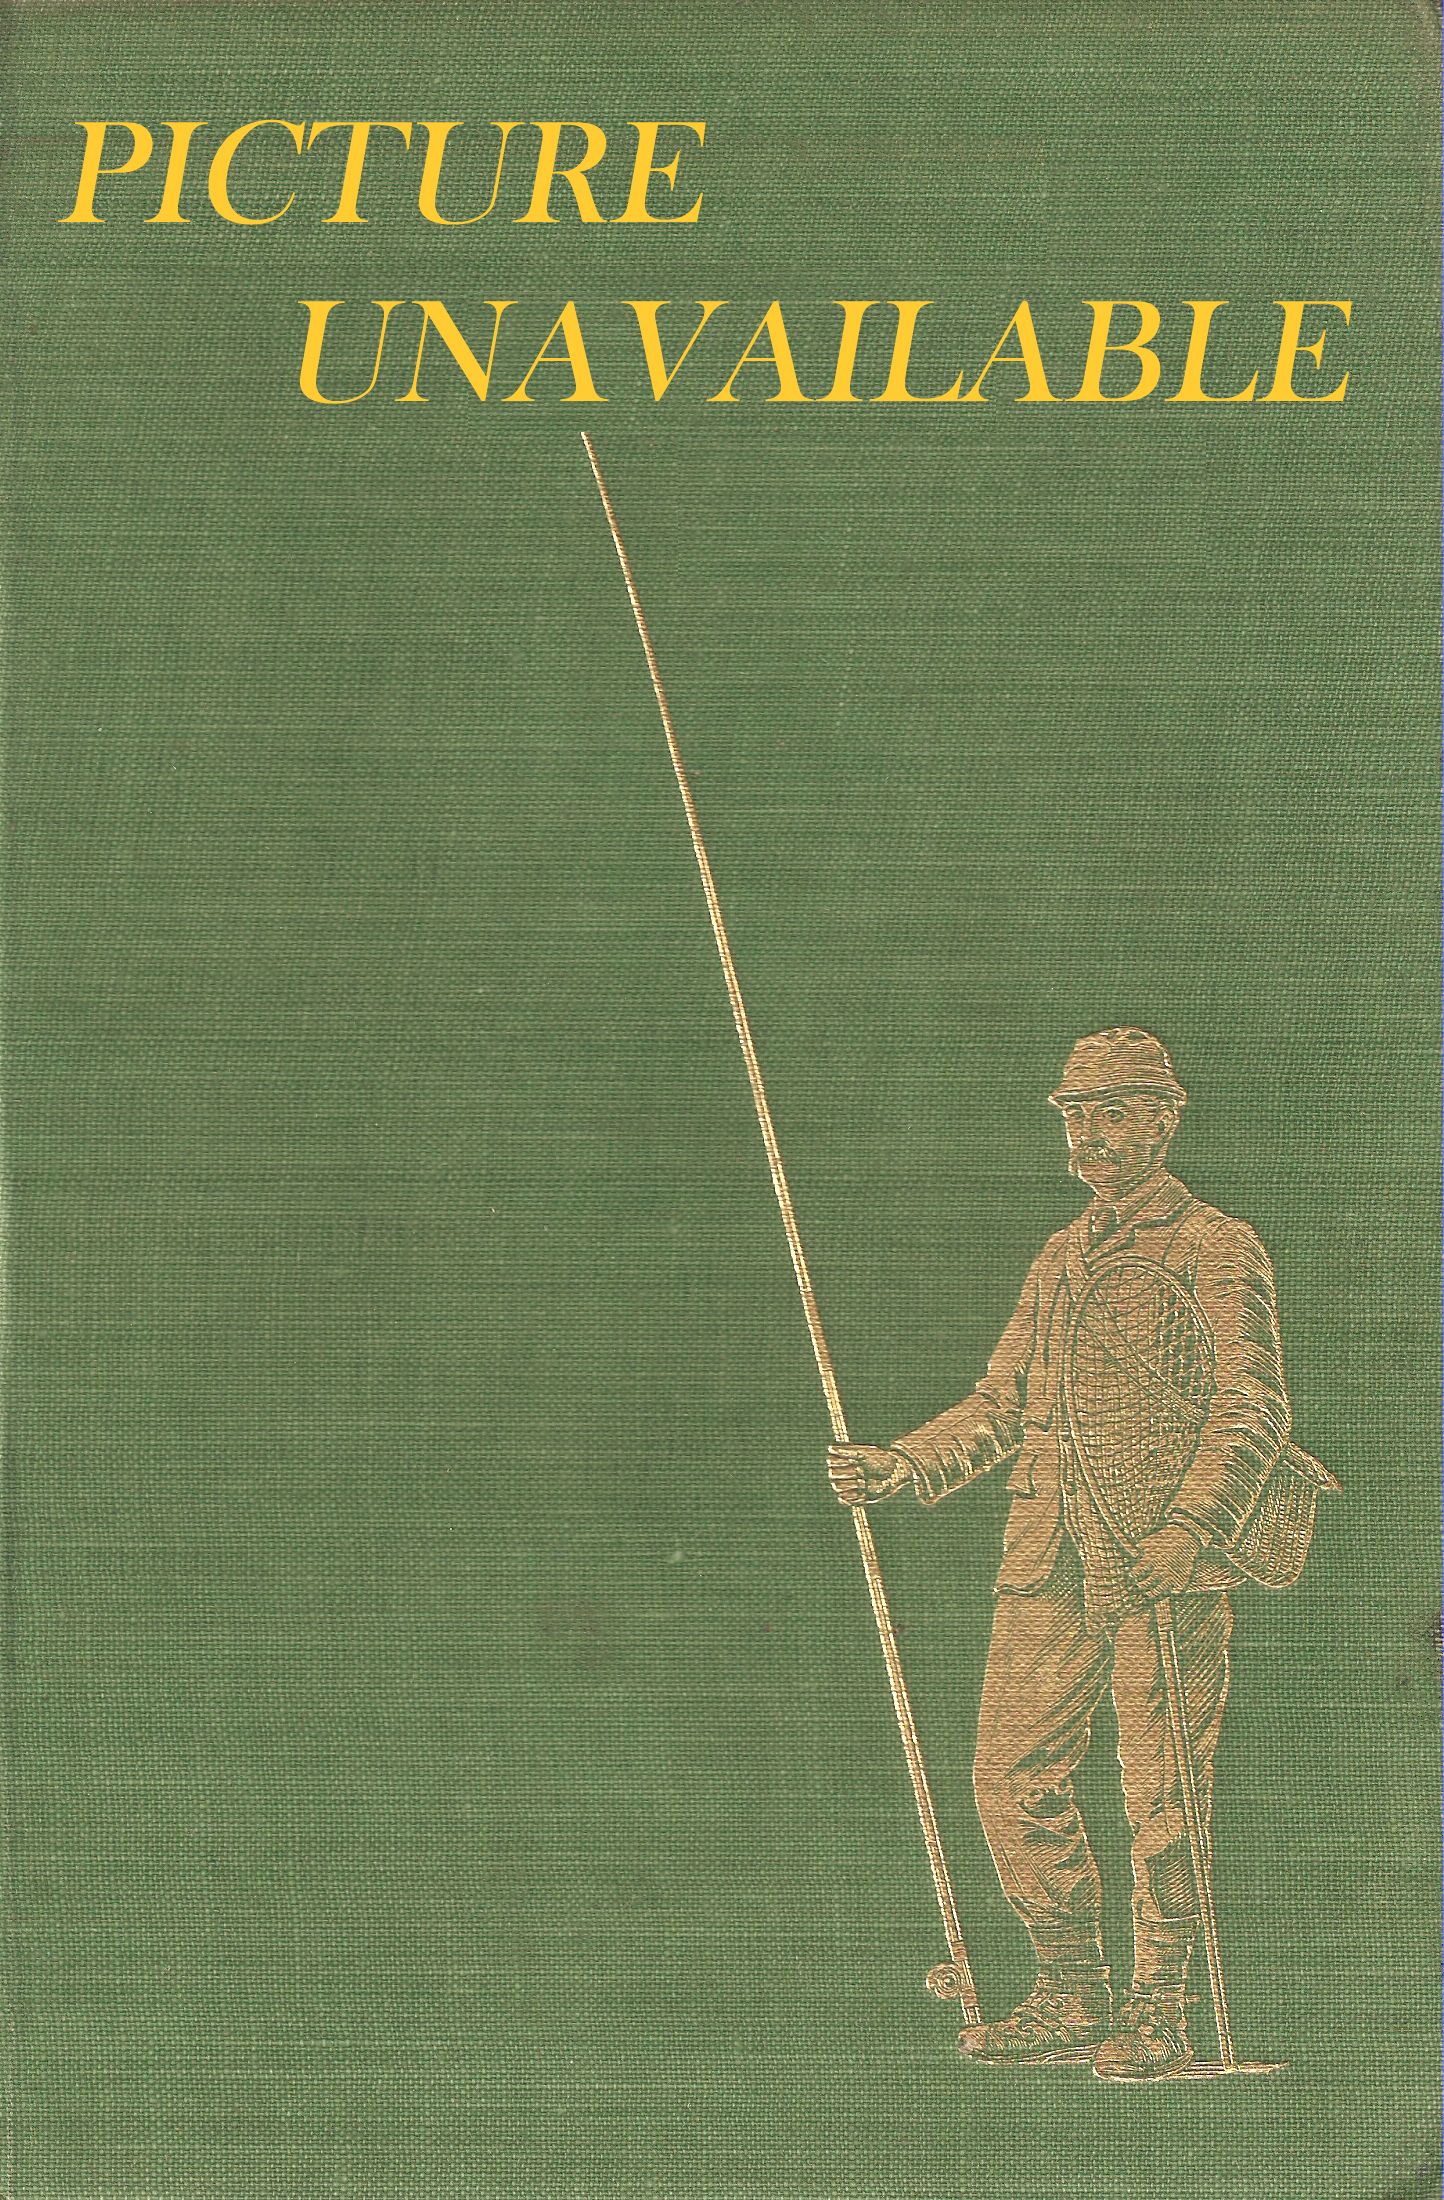 THE FLYFISHER'S ILLUSTRATED REFERENCE BOOK.